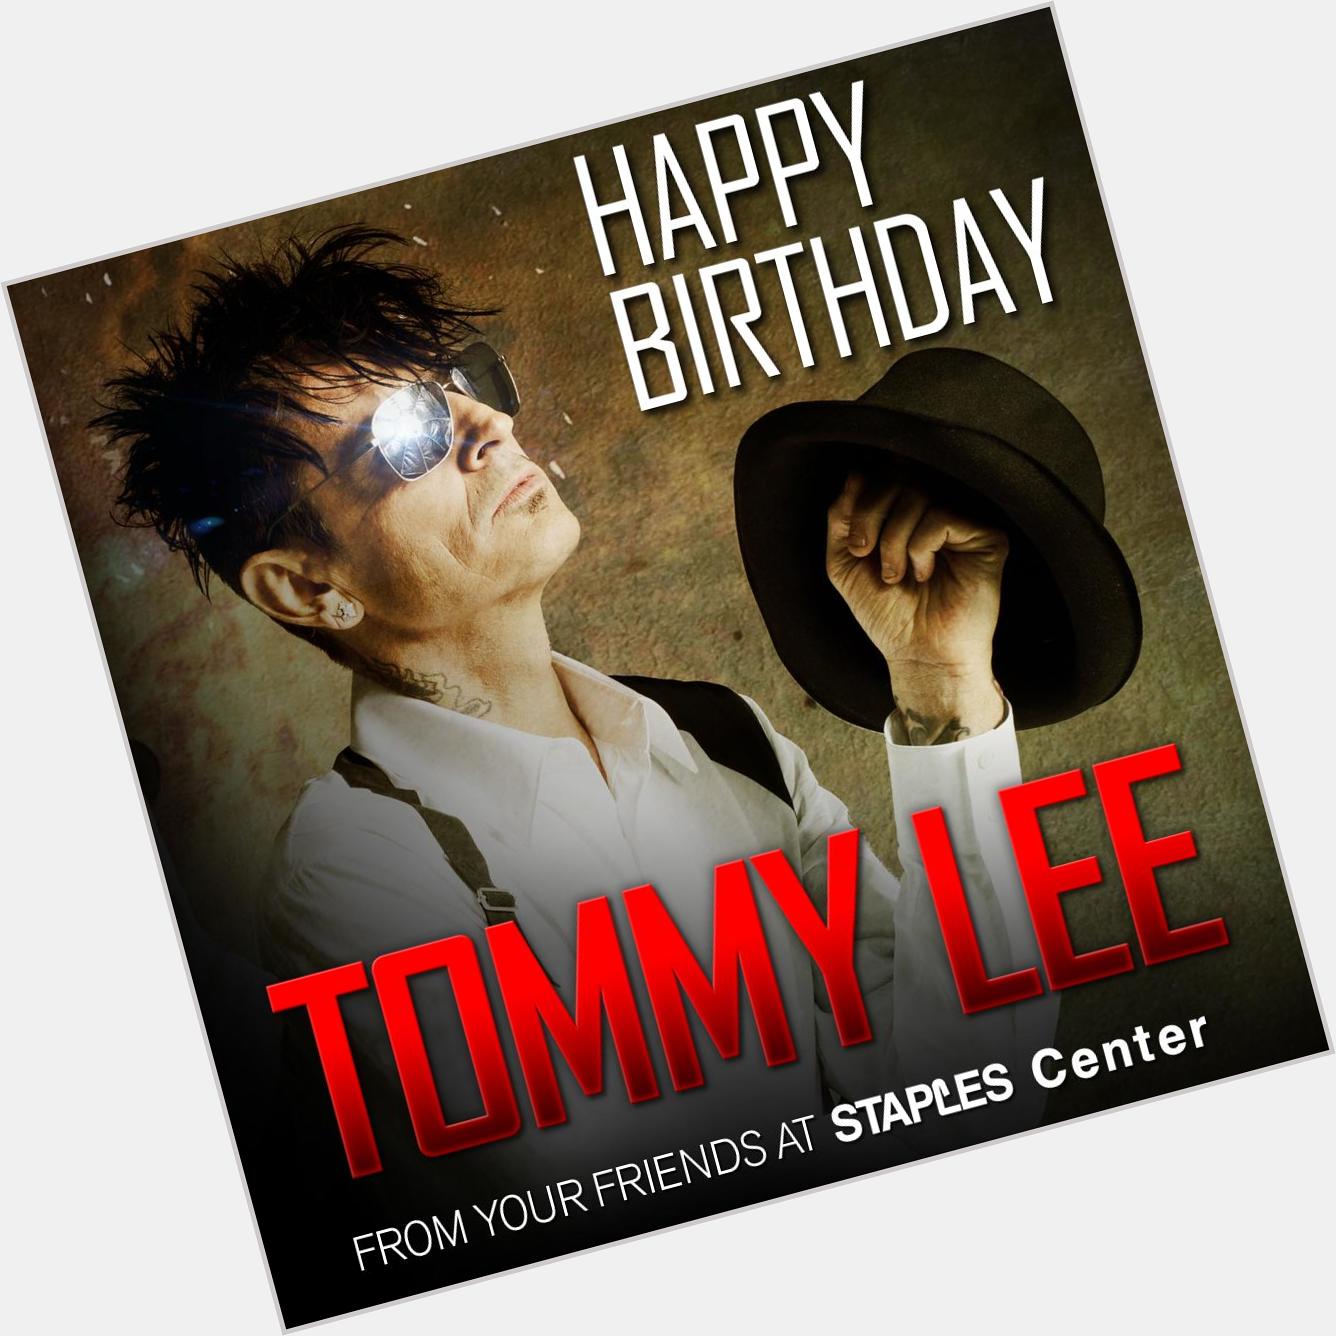 Happy Birthday Tommy Lee! See you here Dec. 28, 30 & 31! More info: 